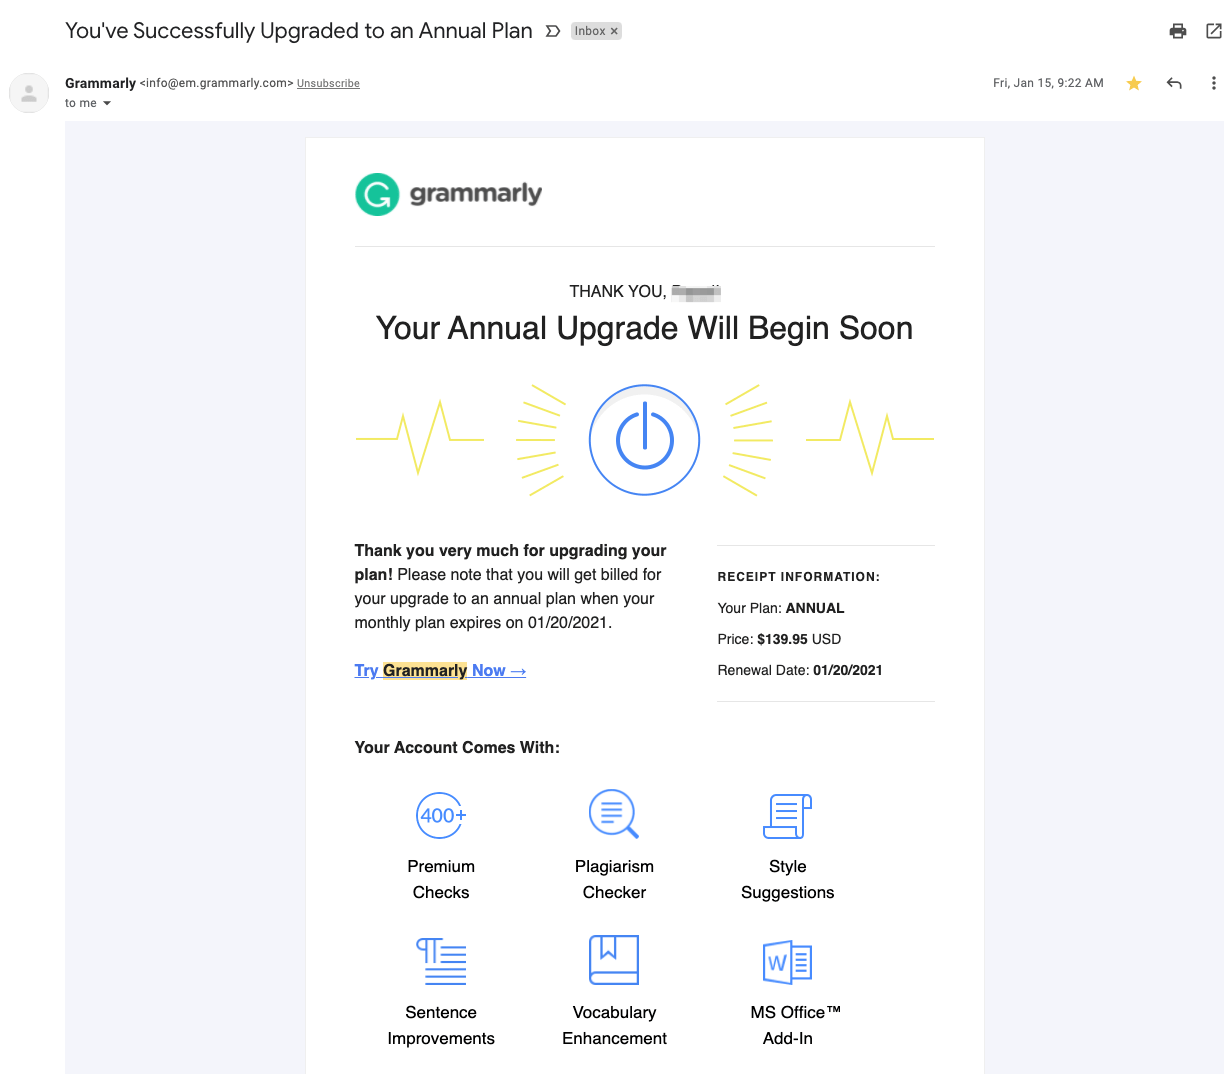 SaaS Email Marketing Strategies: Screenshot of Grammarly email promoting annual billing